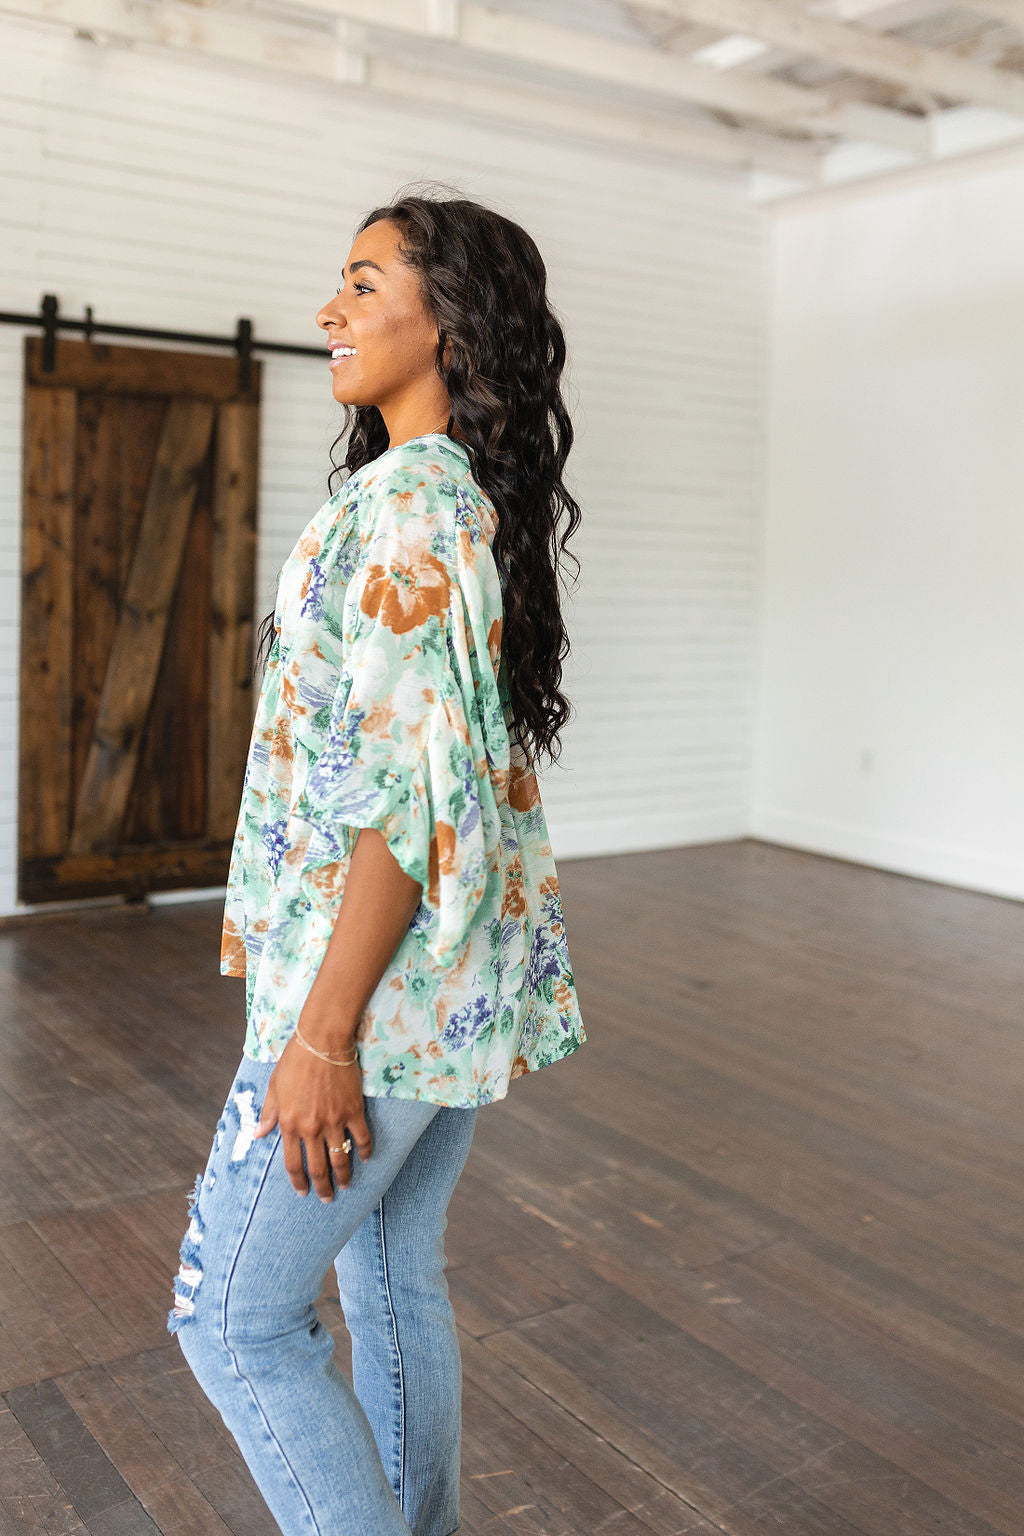 Romantic Story Floral Peplum Top, SMALL & MED left!